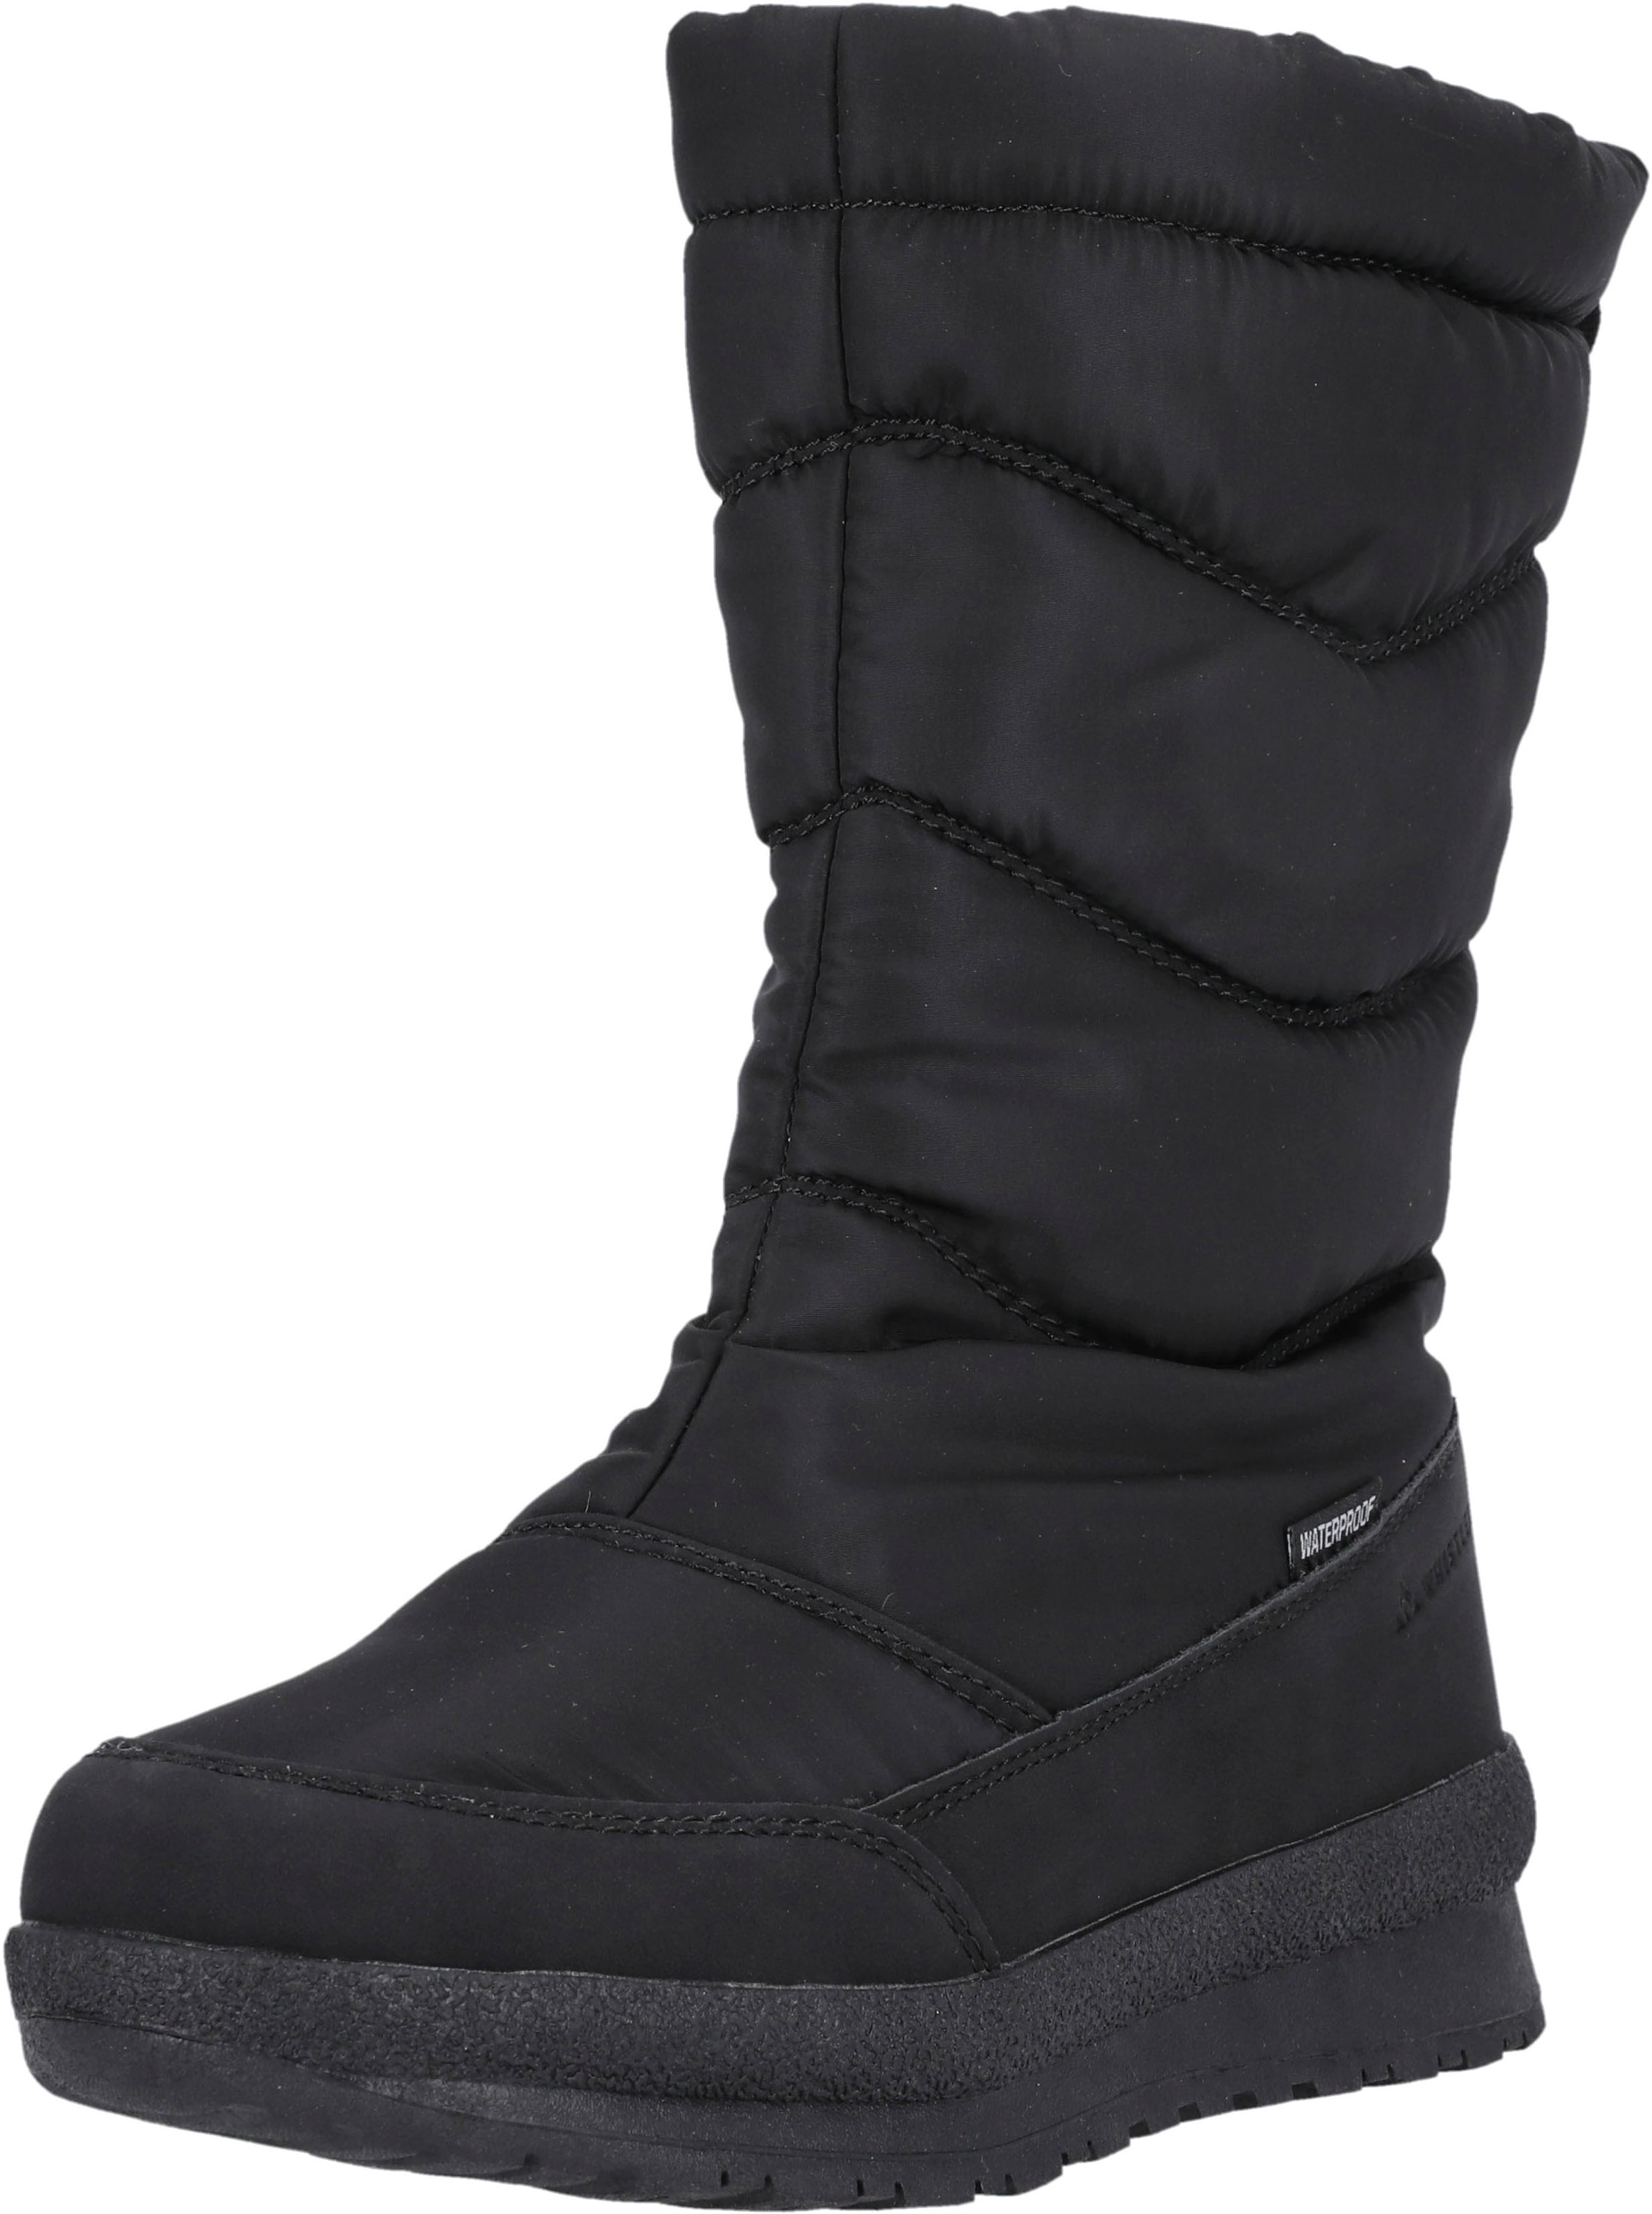 WHISTLER Winterboots »WHW234153«, Warmfutter